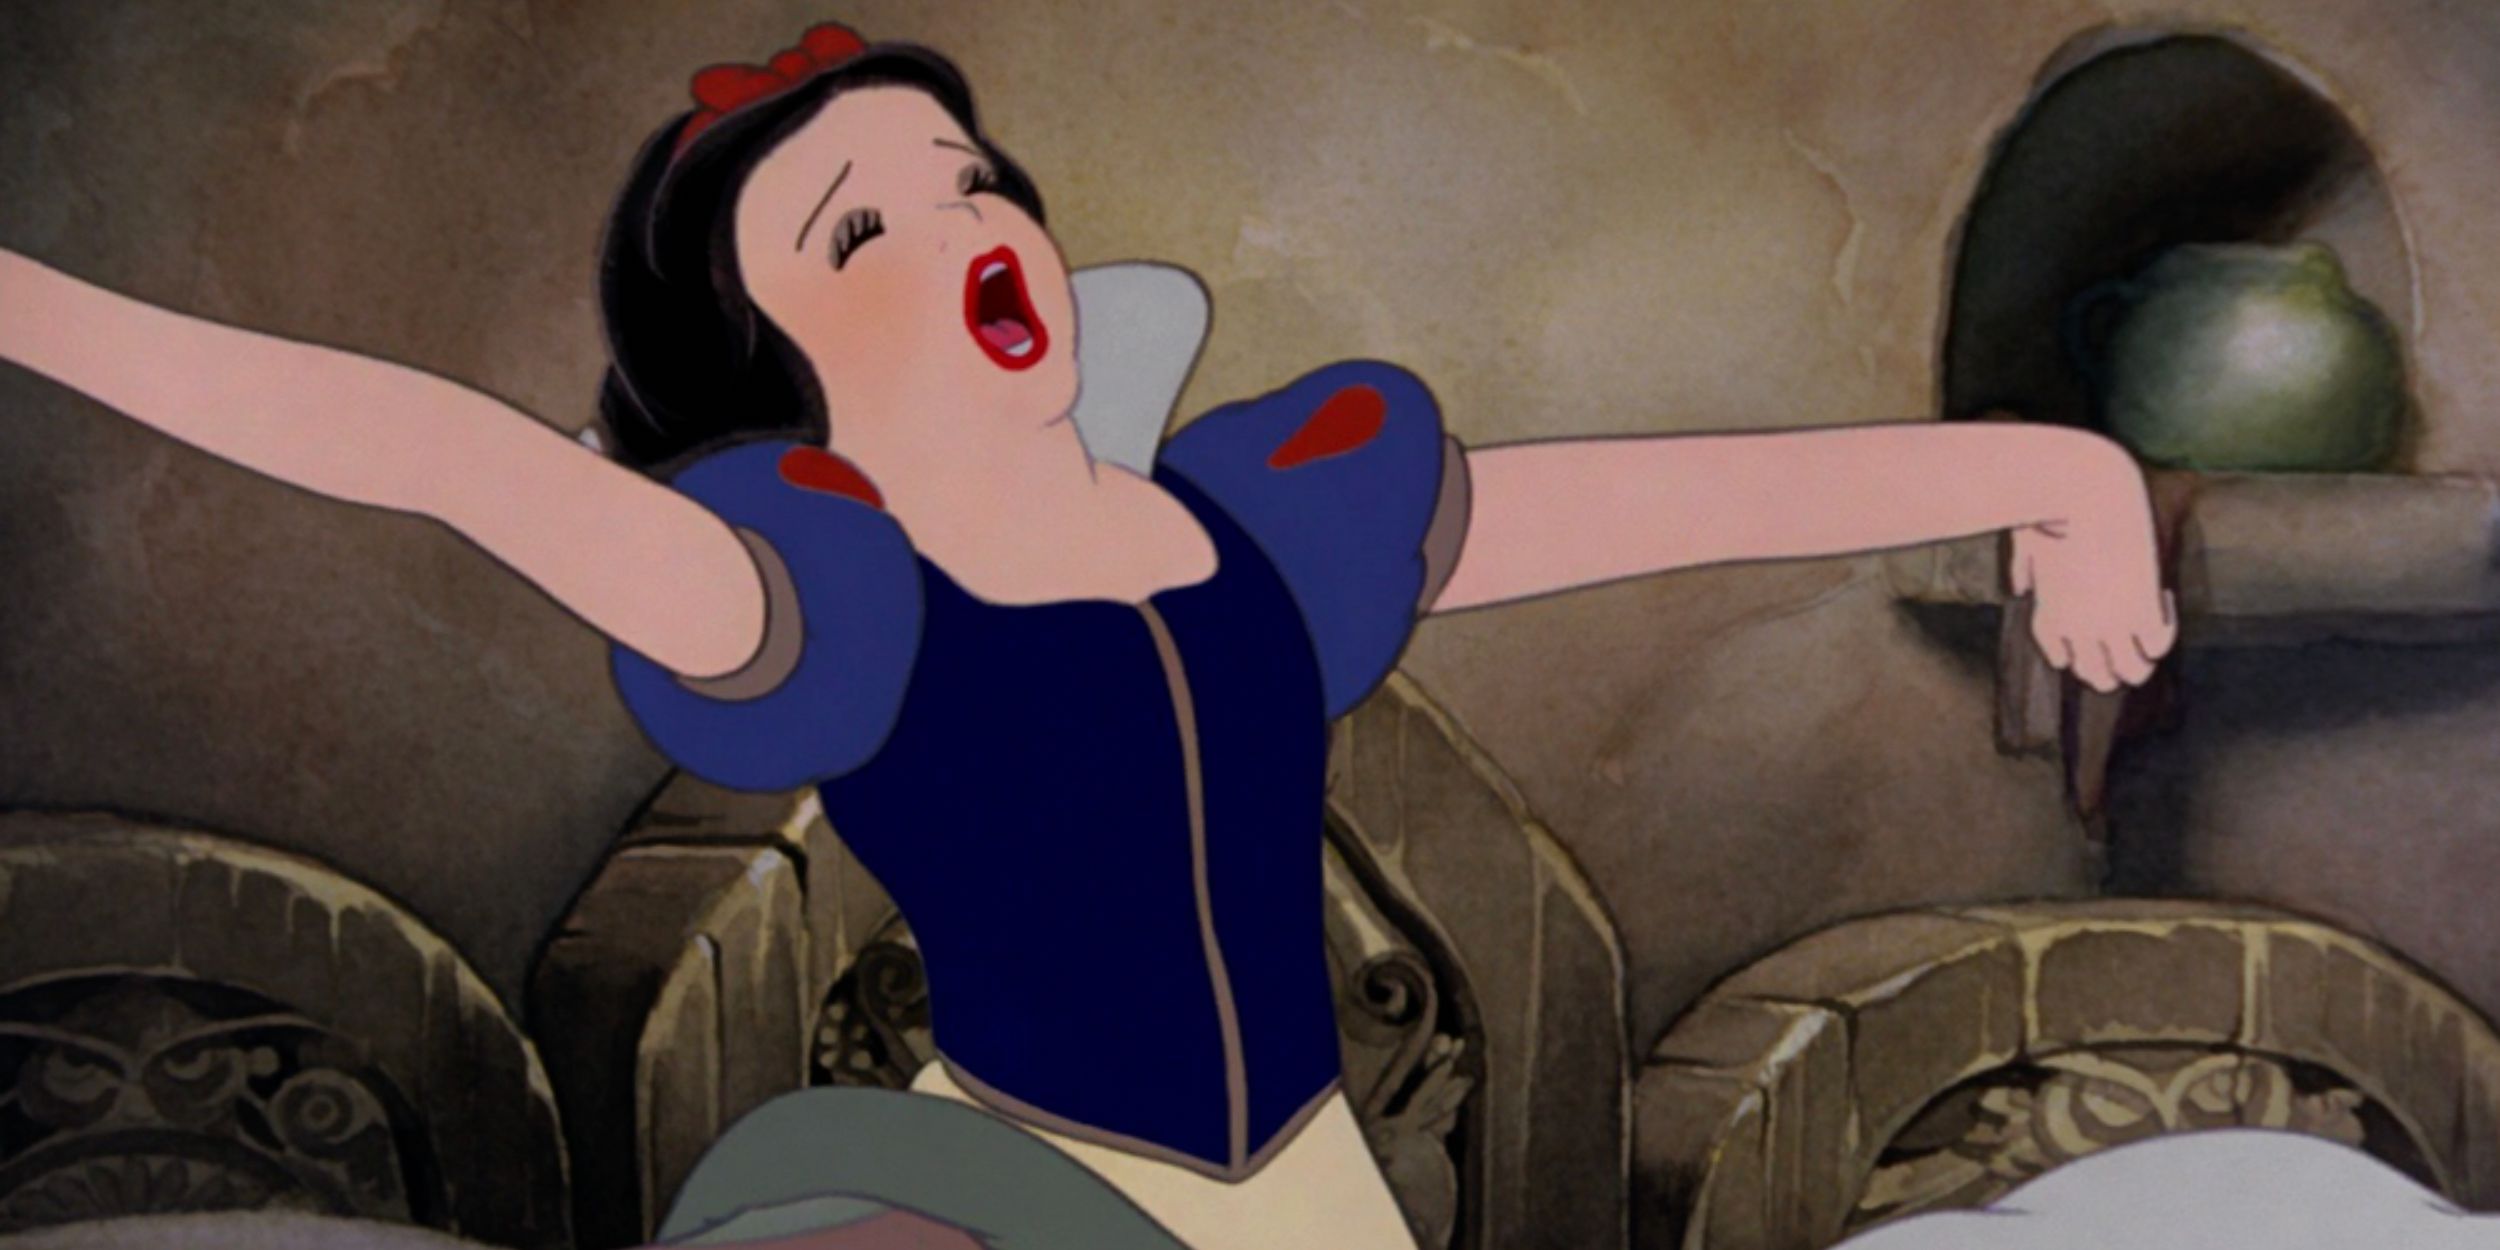 Snow White yawning in Snow White and the Seven Dwarfs